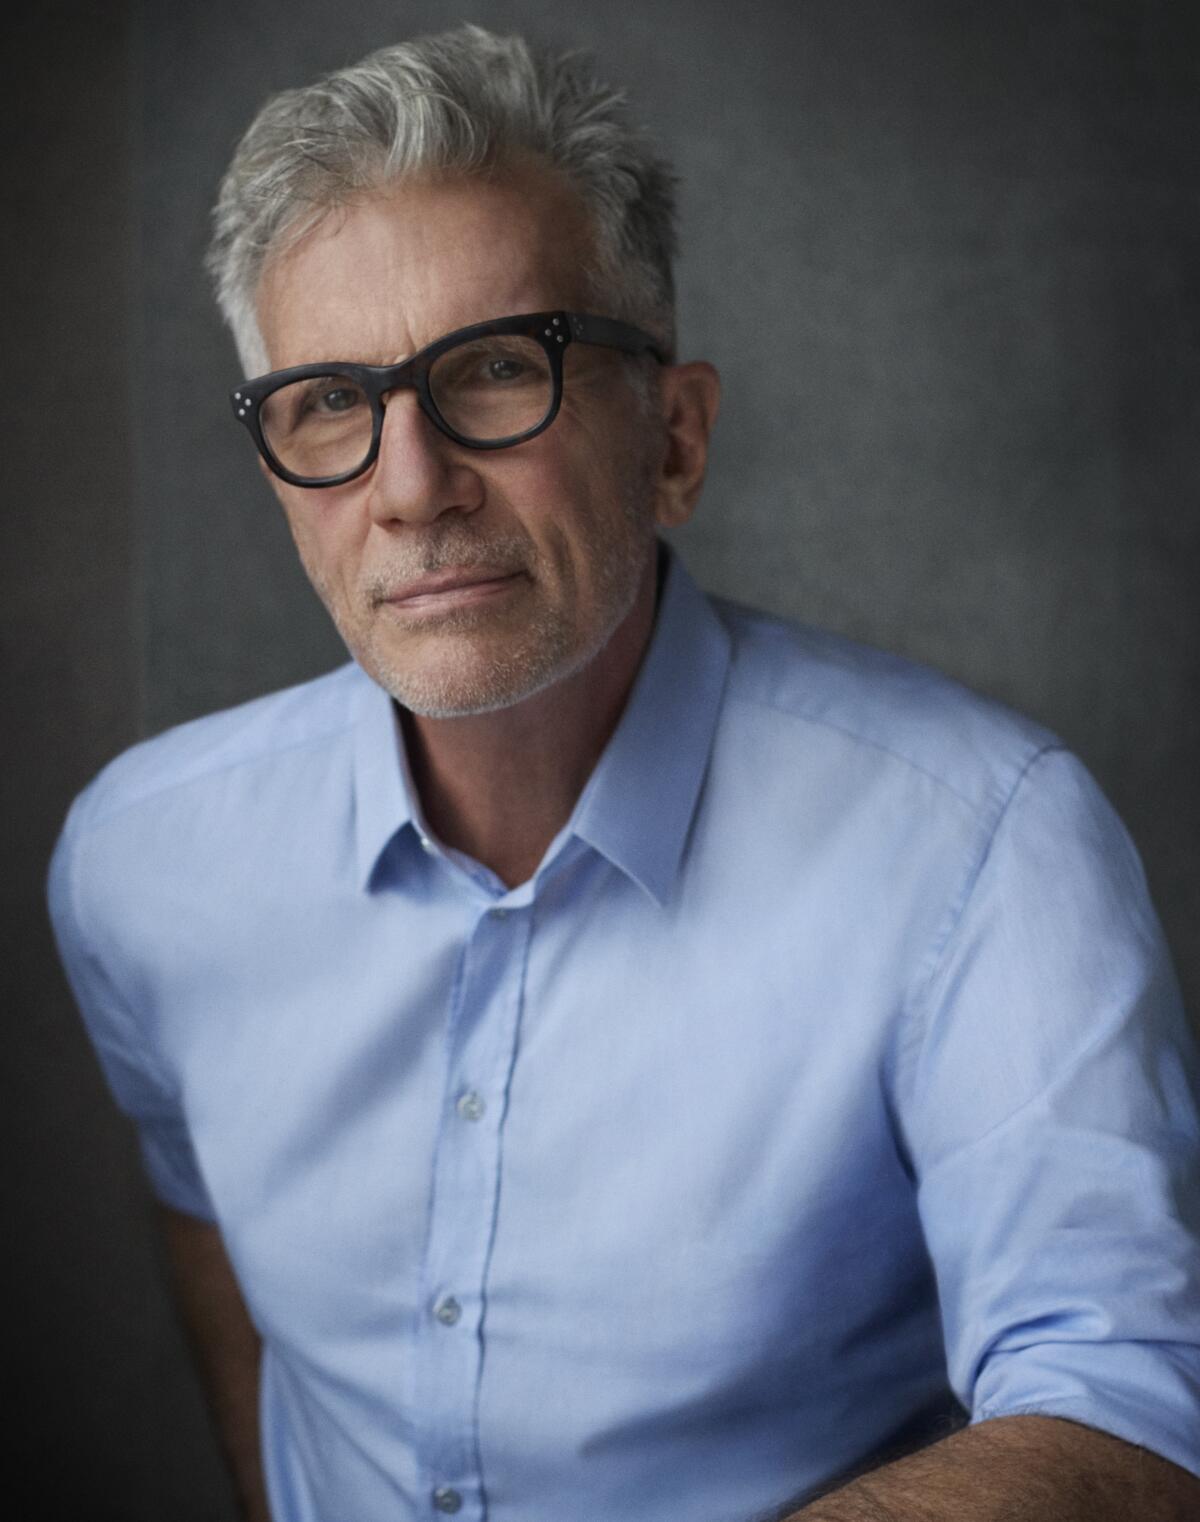 Michael Cunningham, an author with a neat gray haircut, black-framed glasses and a blue dress shirt.